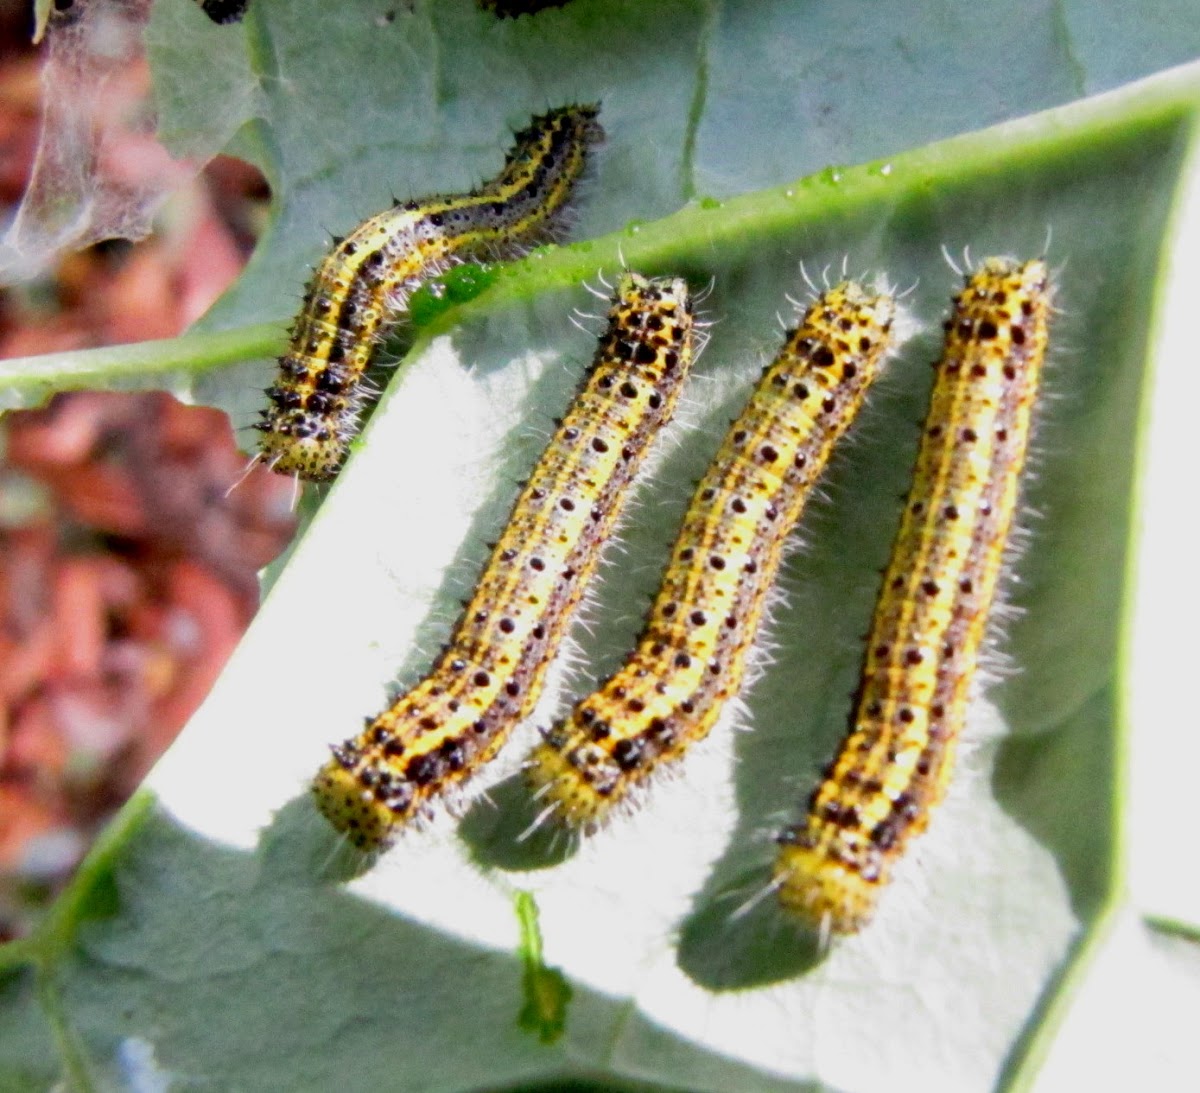 Great southern white caterpillars